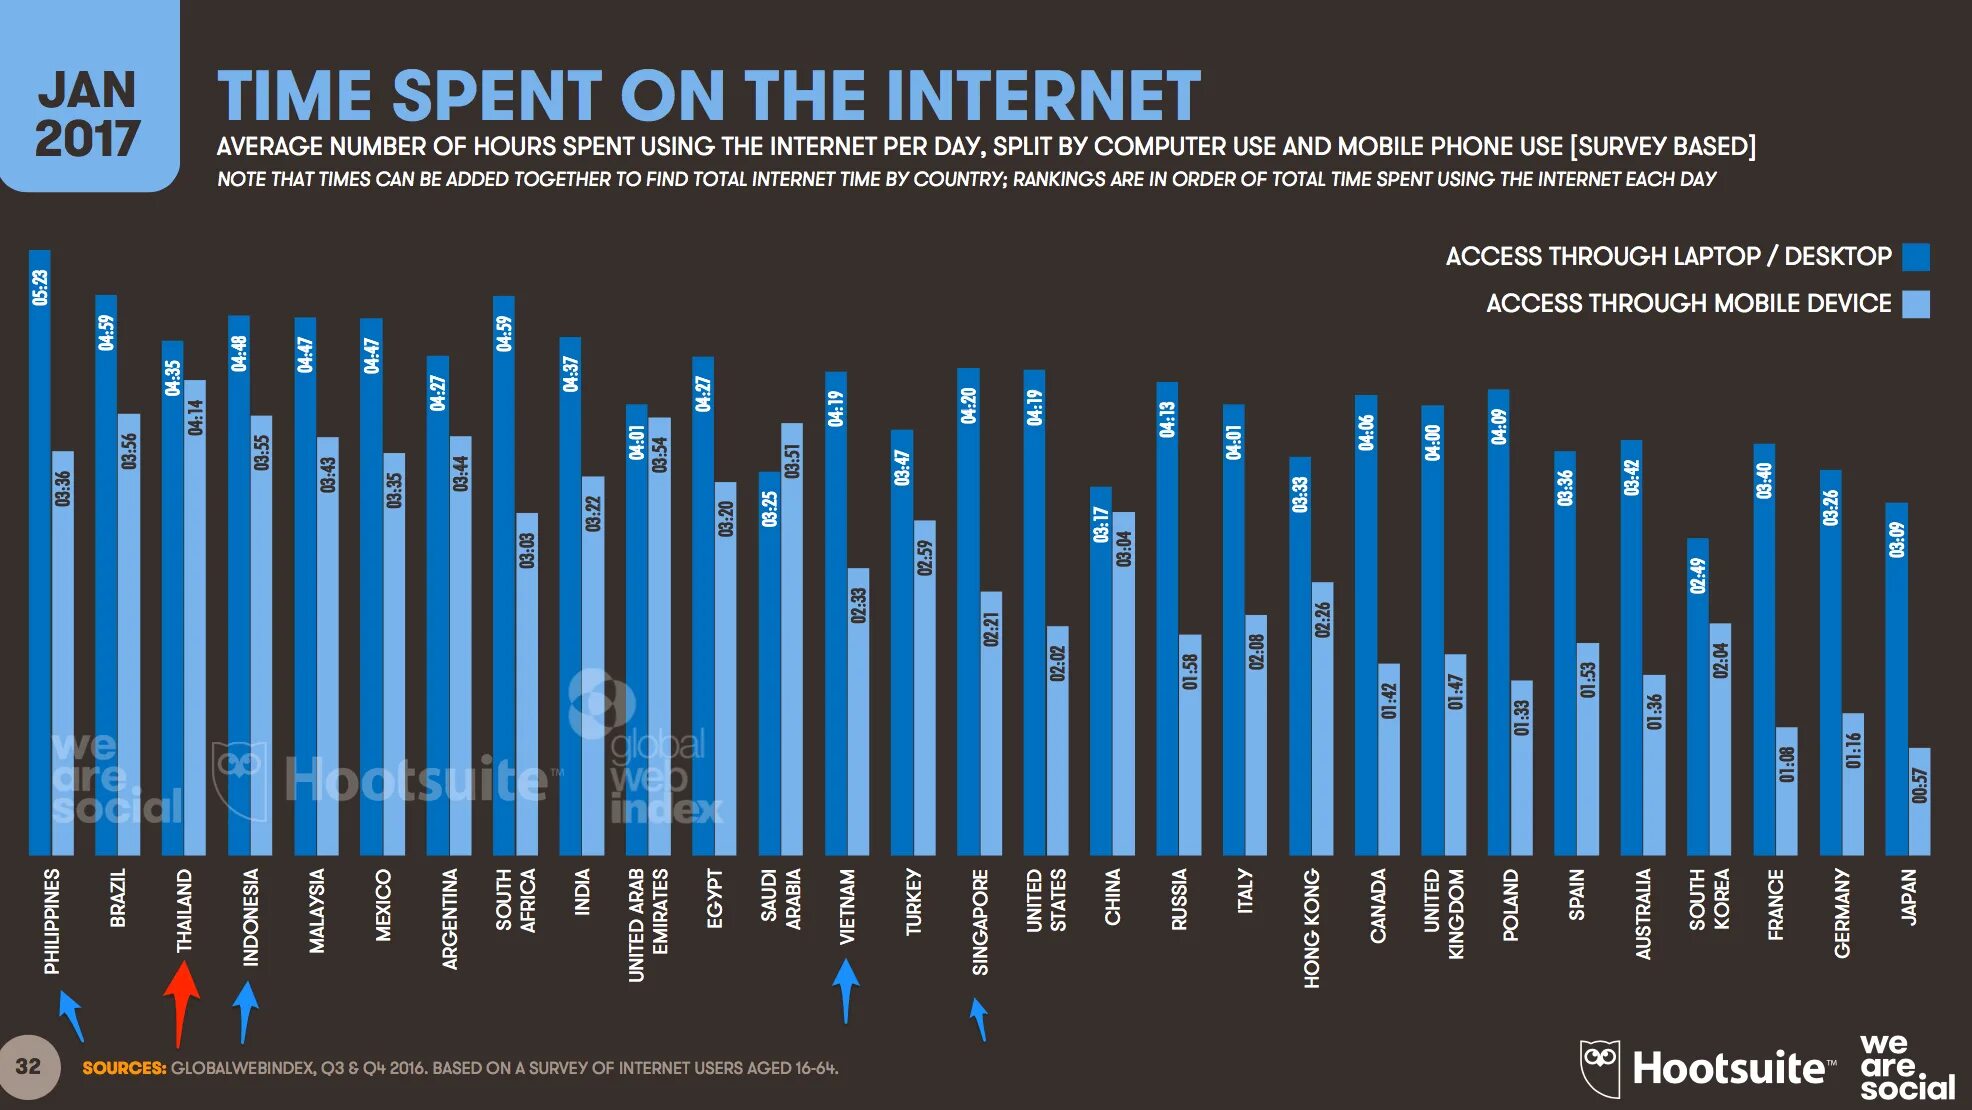 Time spent on social Media. Spending time on the Internet. Age of the Internet топик. We are social.